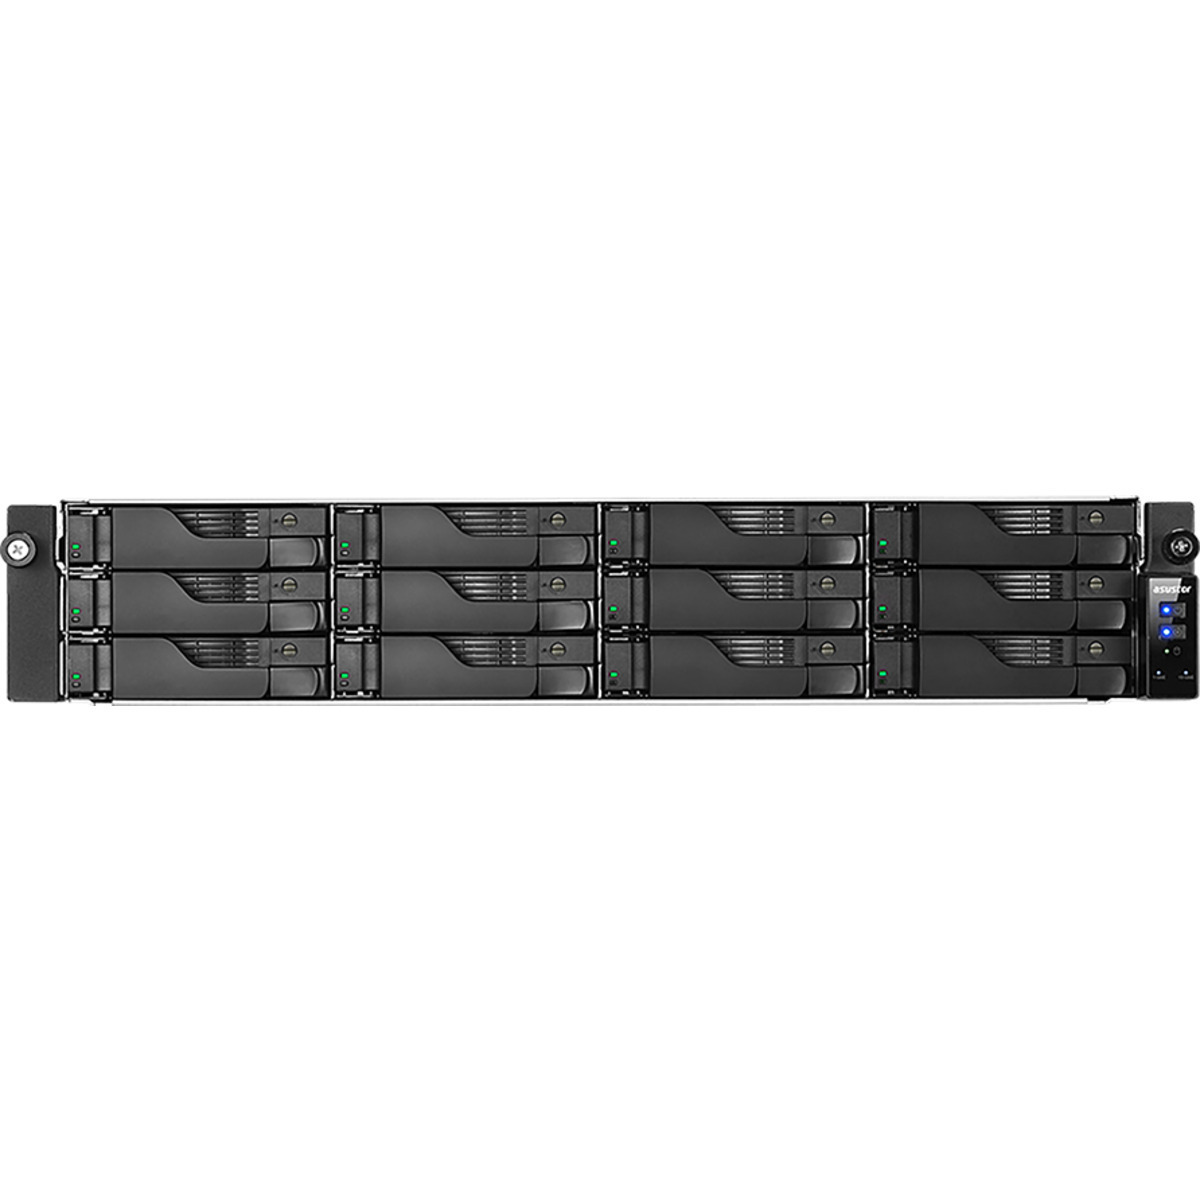 ASUSTOR LOCKERSTOR 12RD AS6512RD 176tb 12-Bay RackMount Multimedia / Power User / Business NAS - Network Attached Storage Device 11x16tb Western Digital Red Pro WD161KFGX 3.5 7200rpm SATA 6Gb/s HDD NAS Class Drives Installed - Burn-In Tested - FREE RAM UPGRADE LOCKERSTOR 12RD AS6512RD